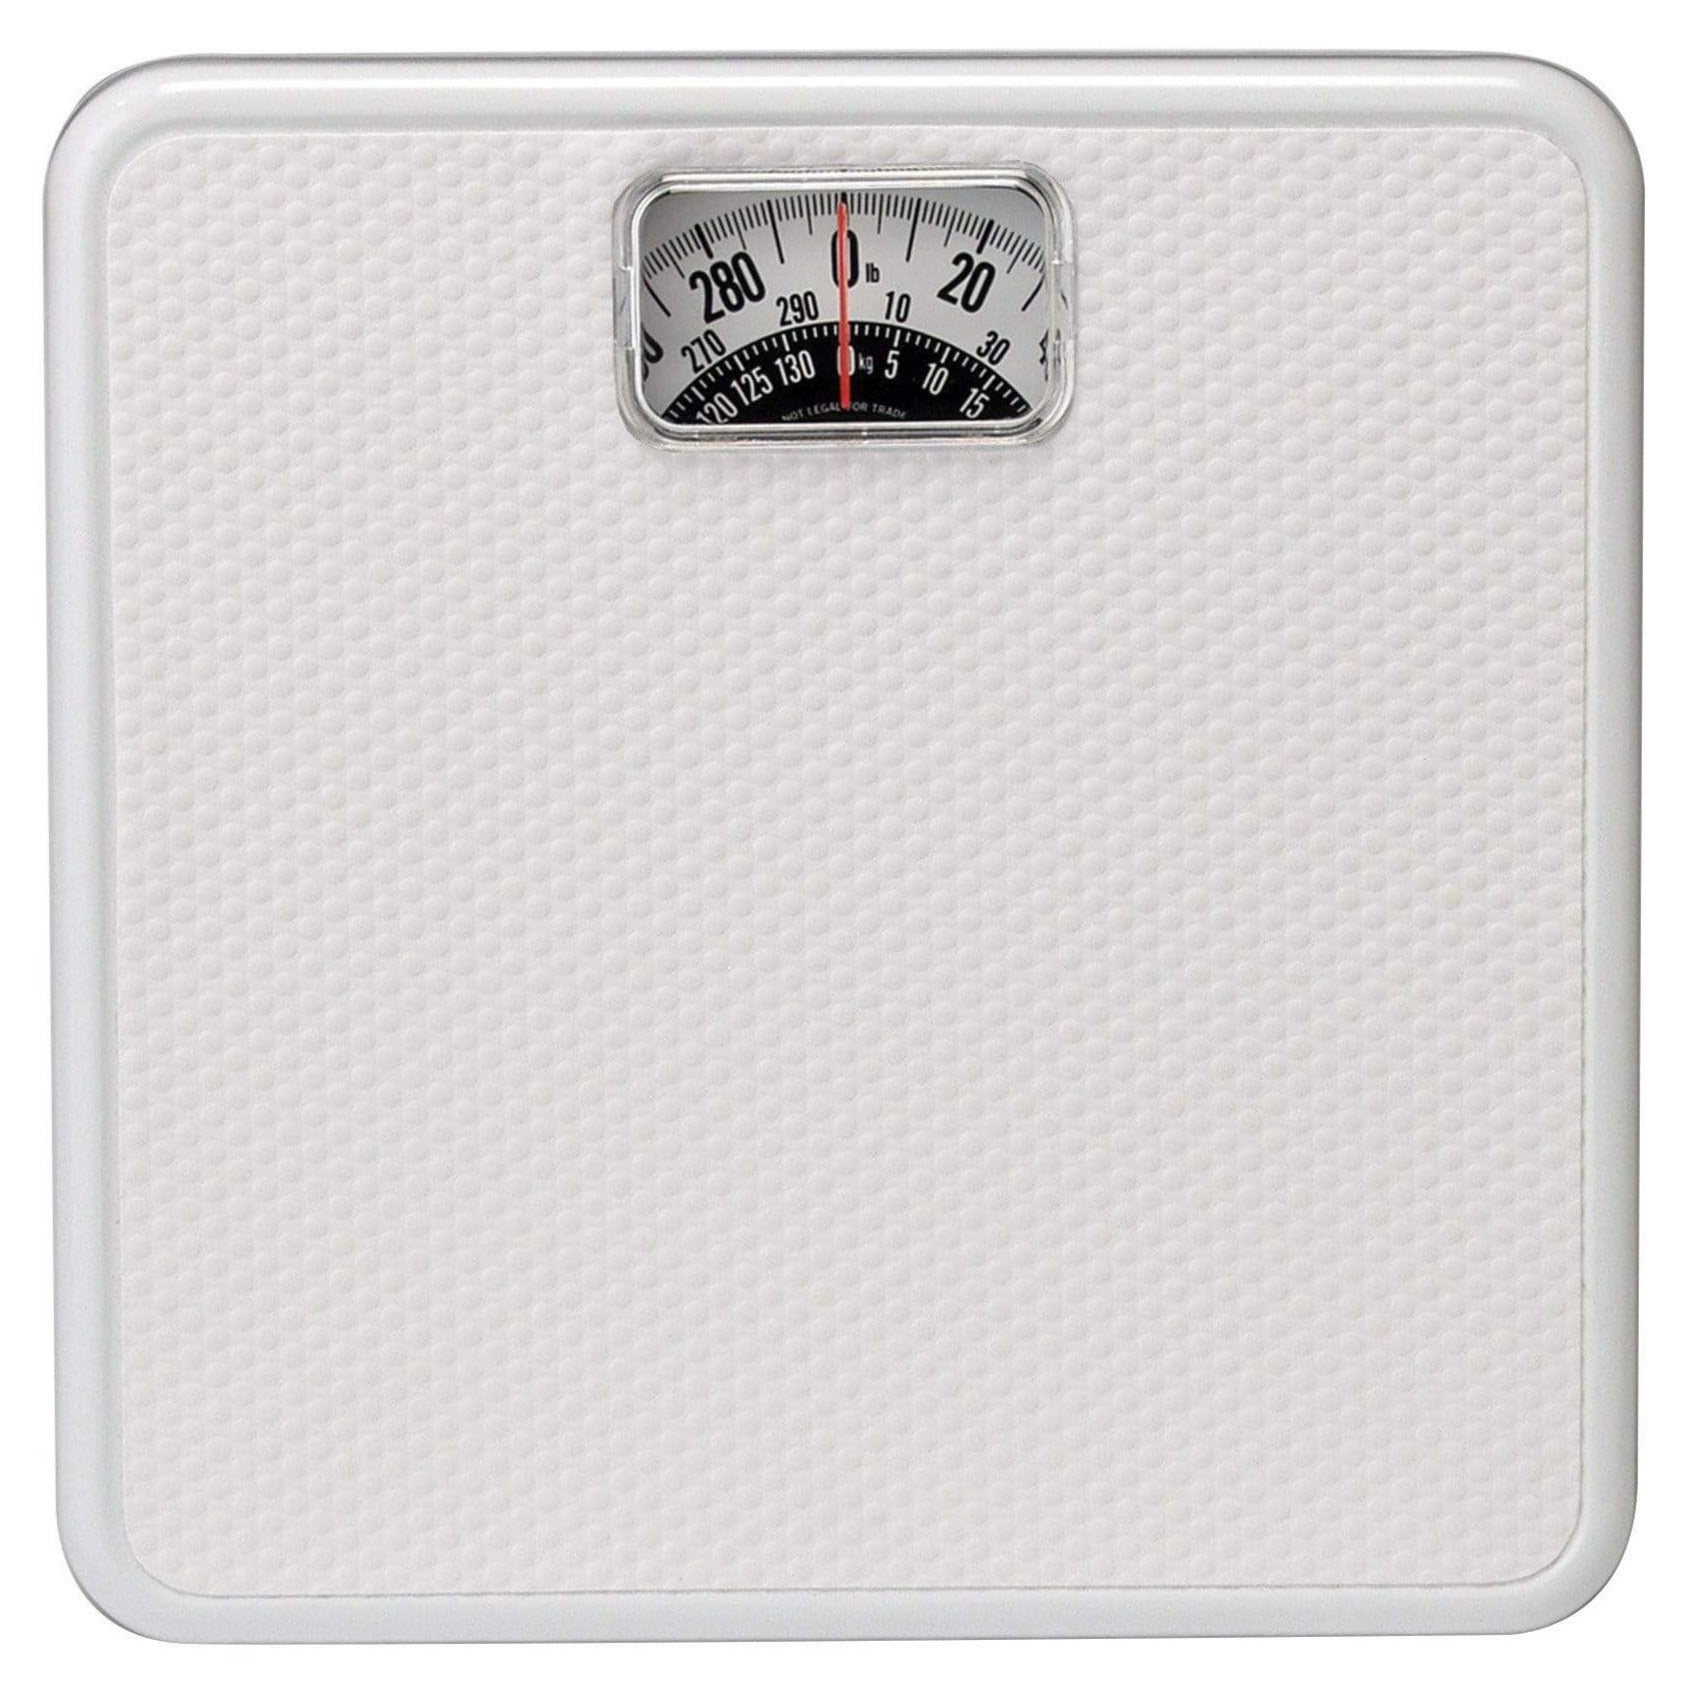 Analog Bathroom Scale with White Mat